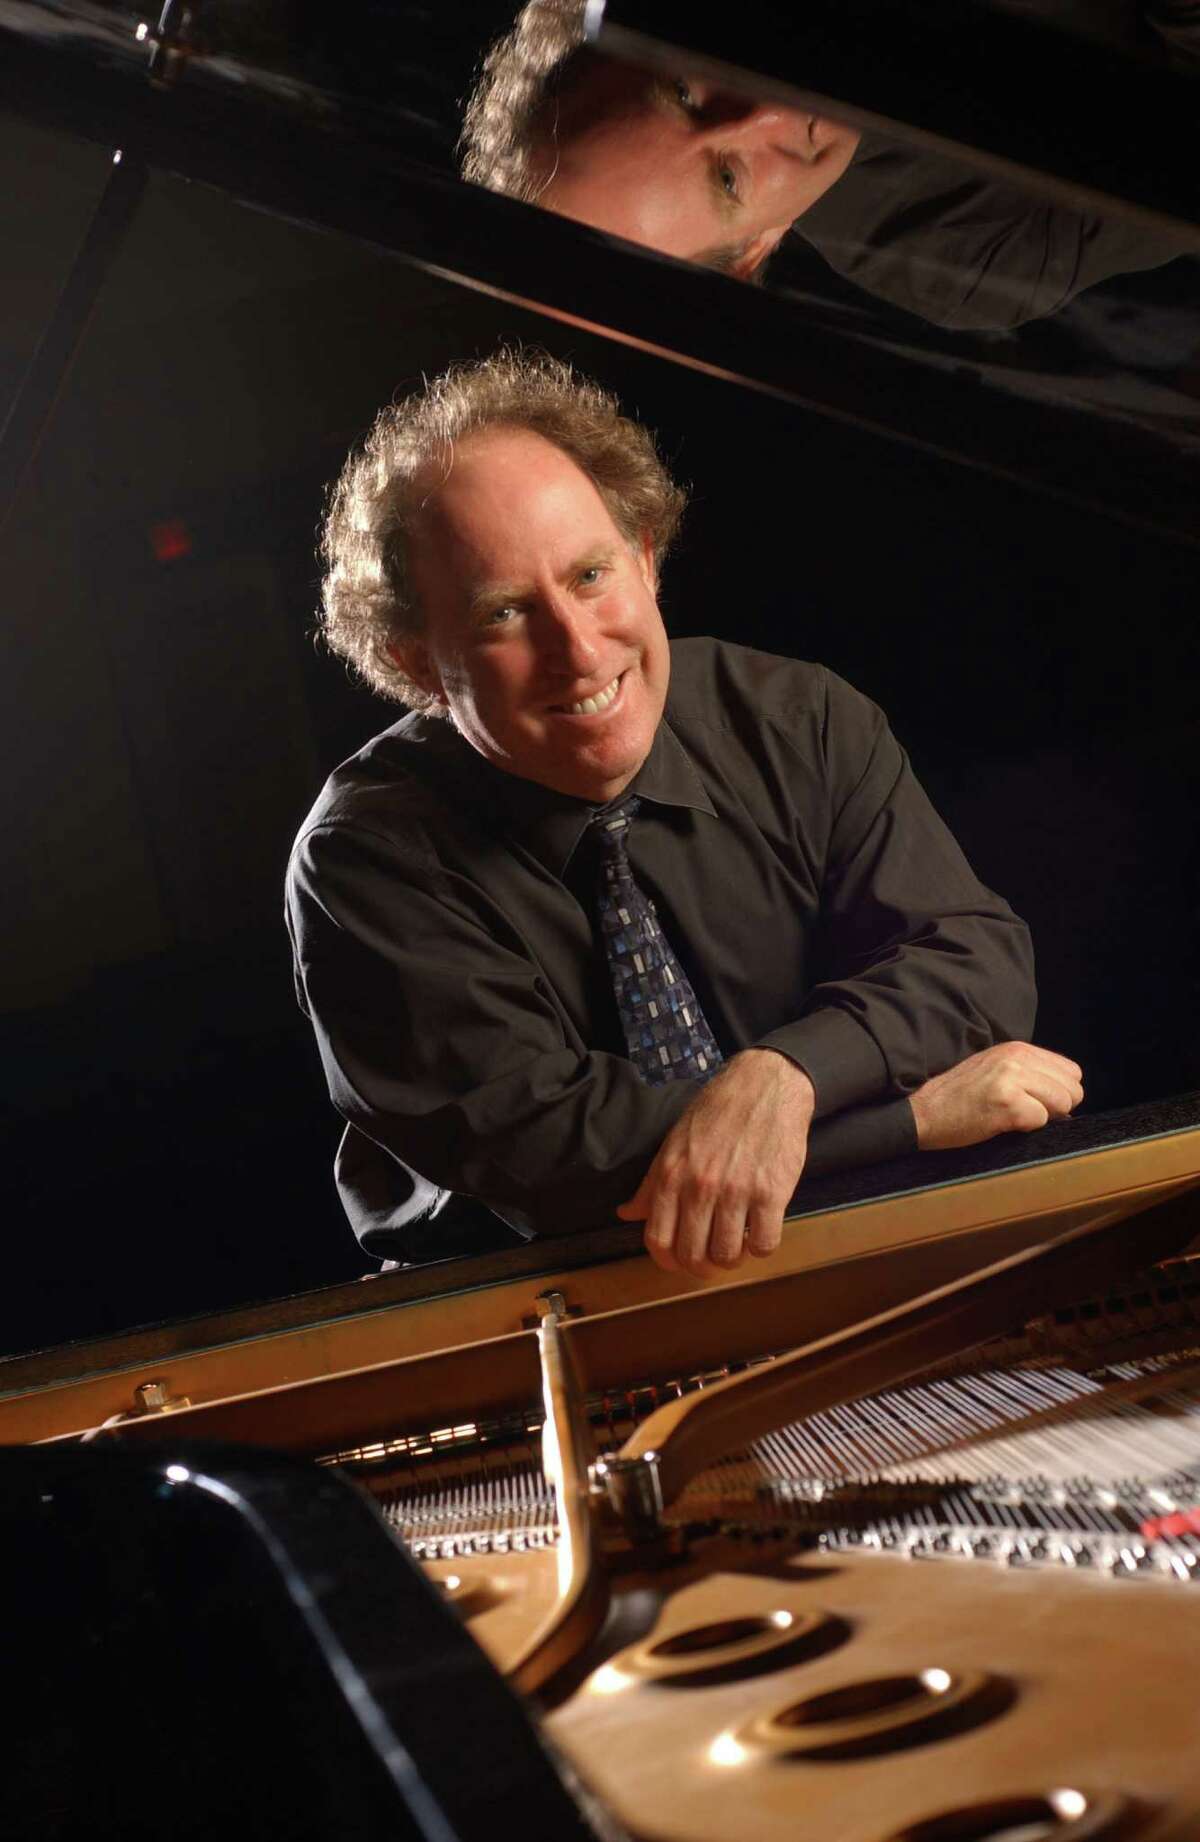 Pianist Jeffrey Kahane is the featured soloist for the March 1 and 2, 2014, concerts presented by the Stamford Symphony Orchestra at the Palace Theatre in Stamford, Conn. For more information, visit www.stamfordsymphony.org or call 203-325-4466.